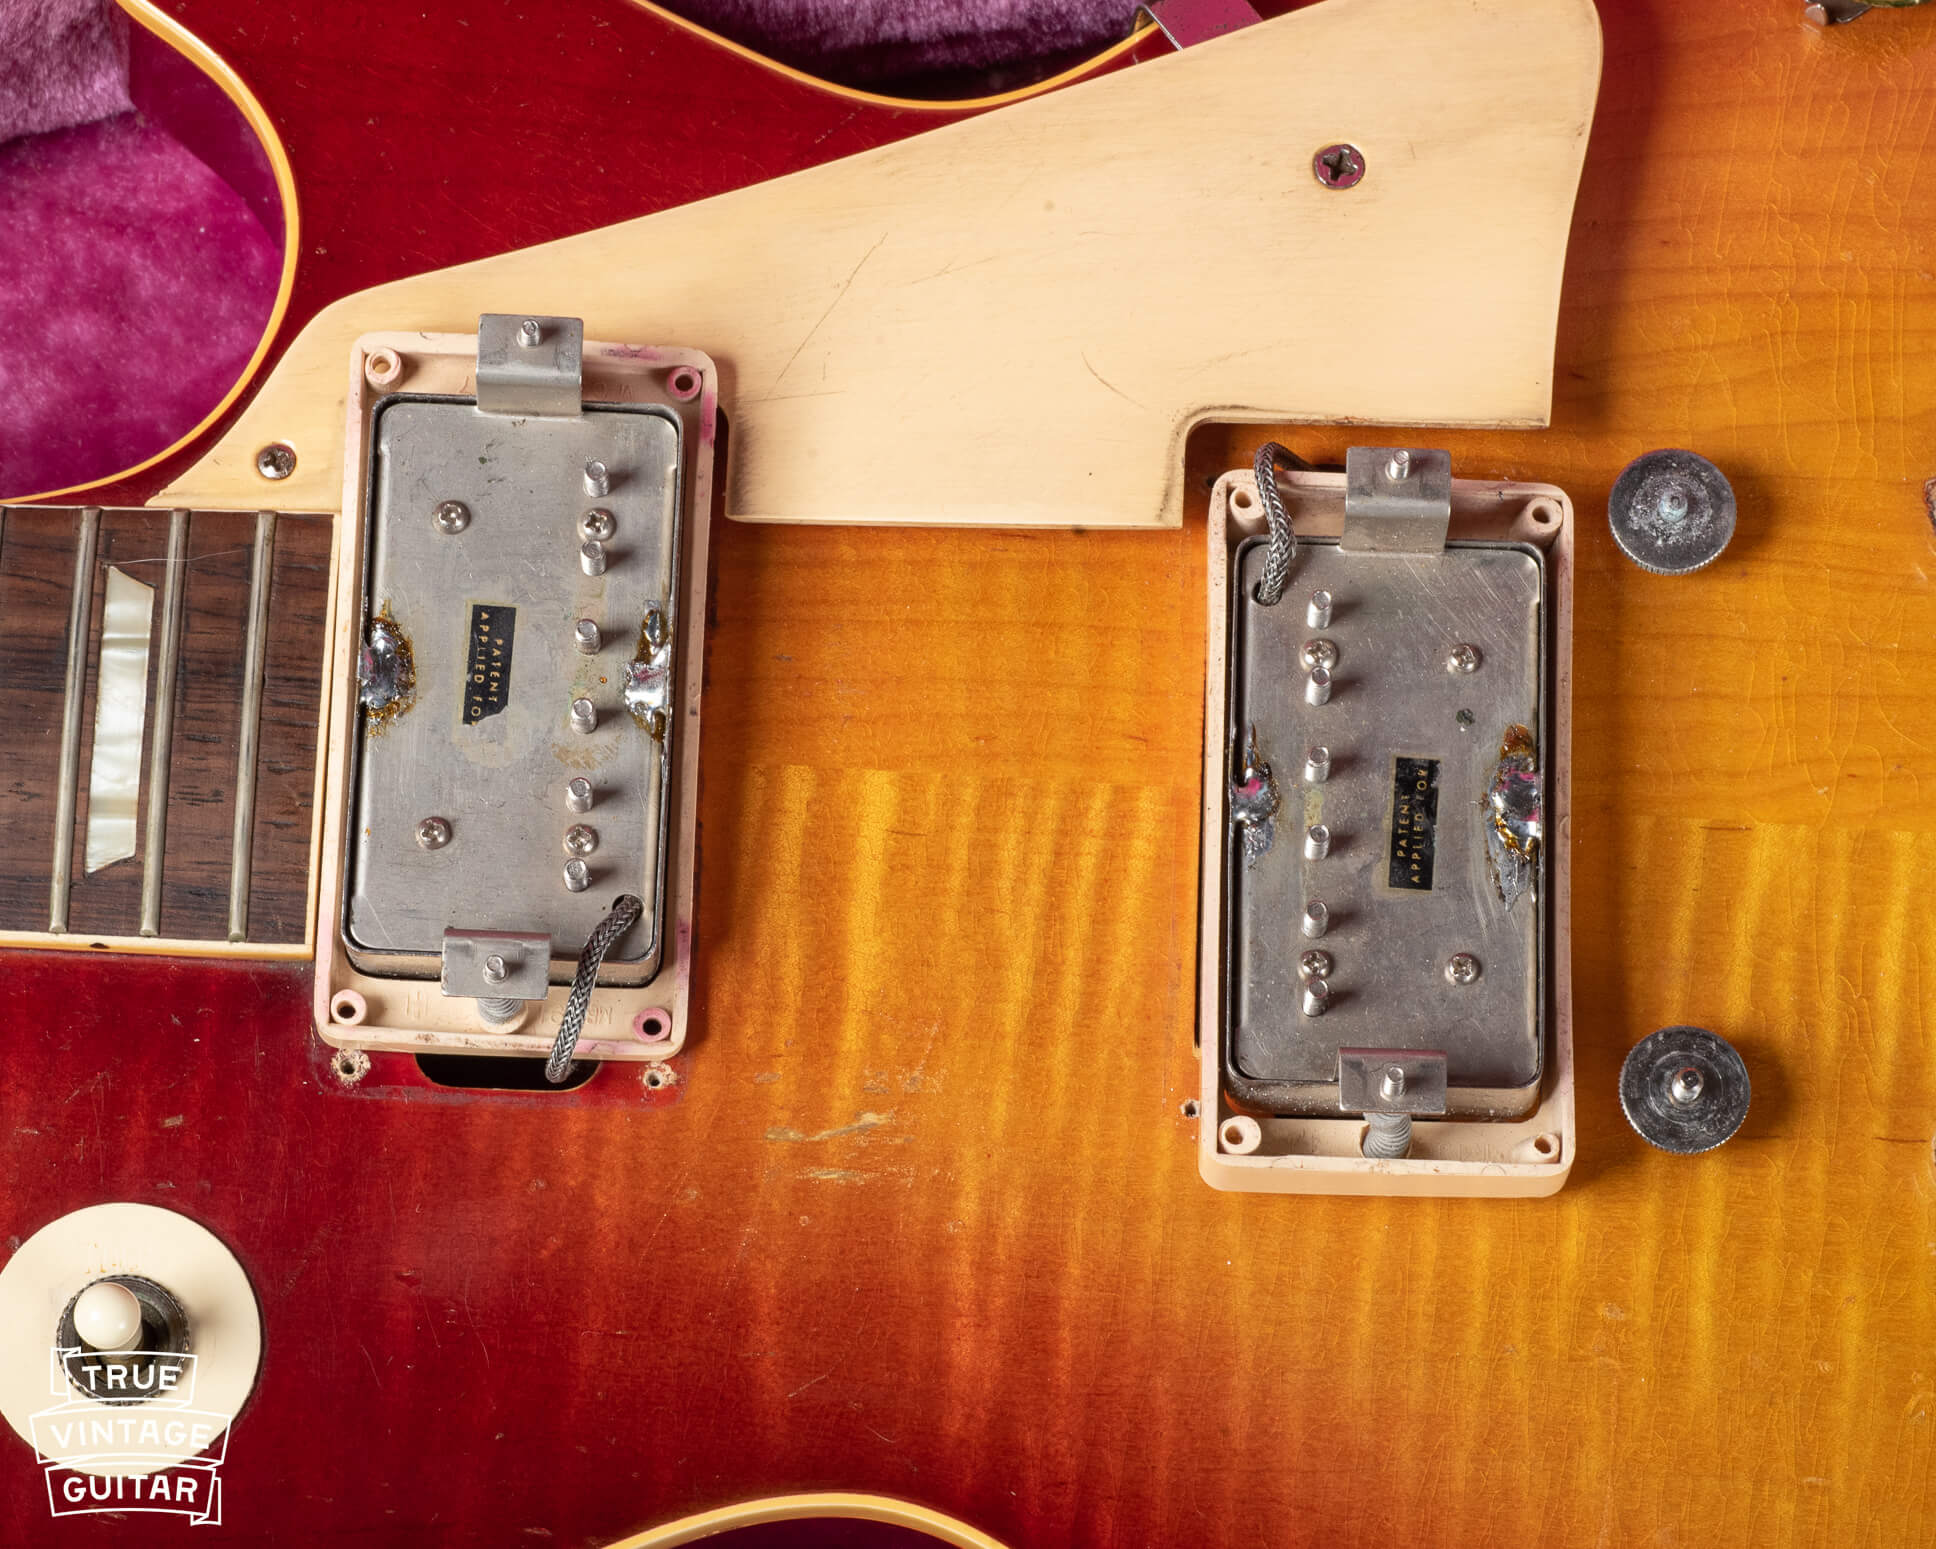 1958 Gibson Les Paul Standard pickups with PAF stickers